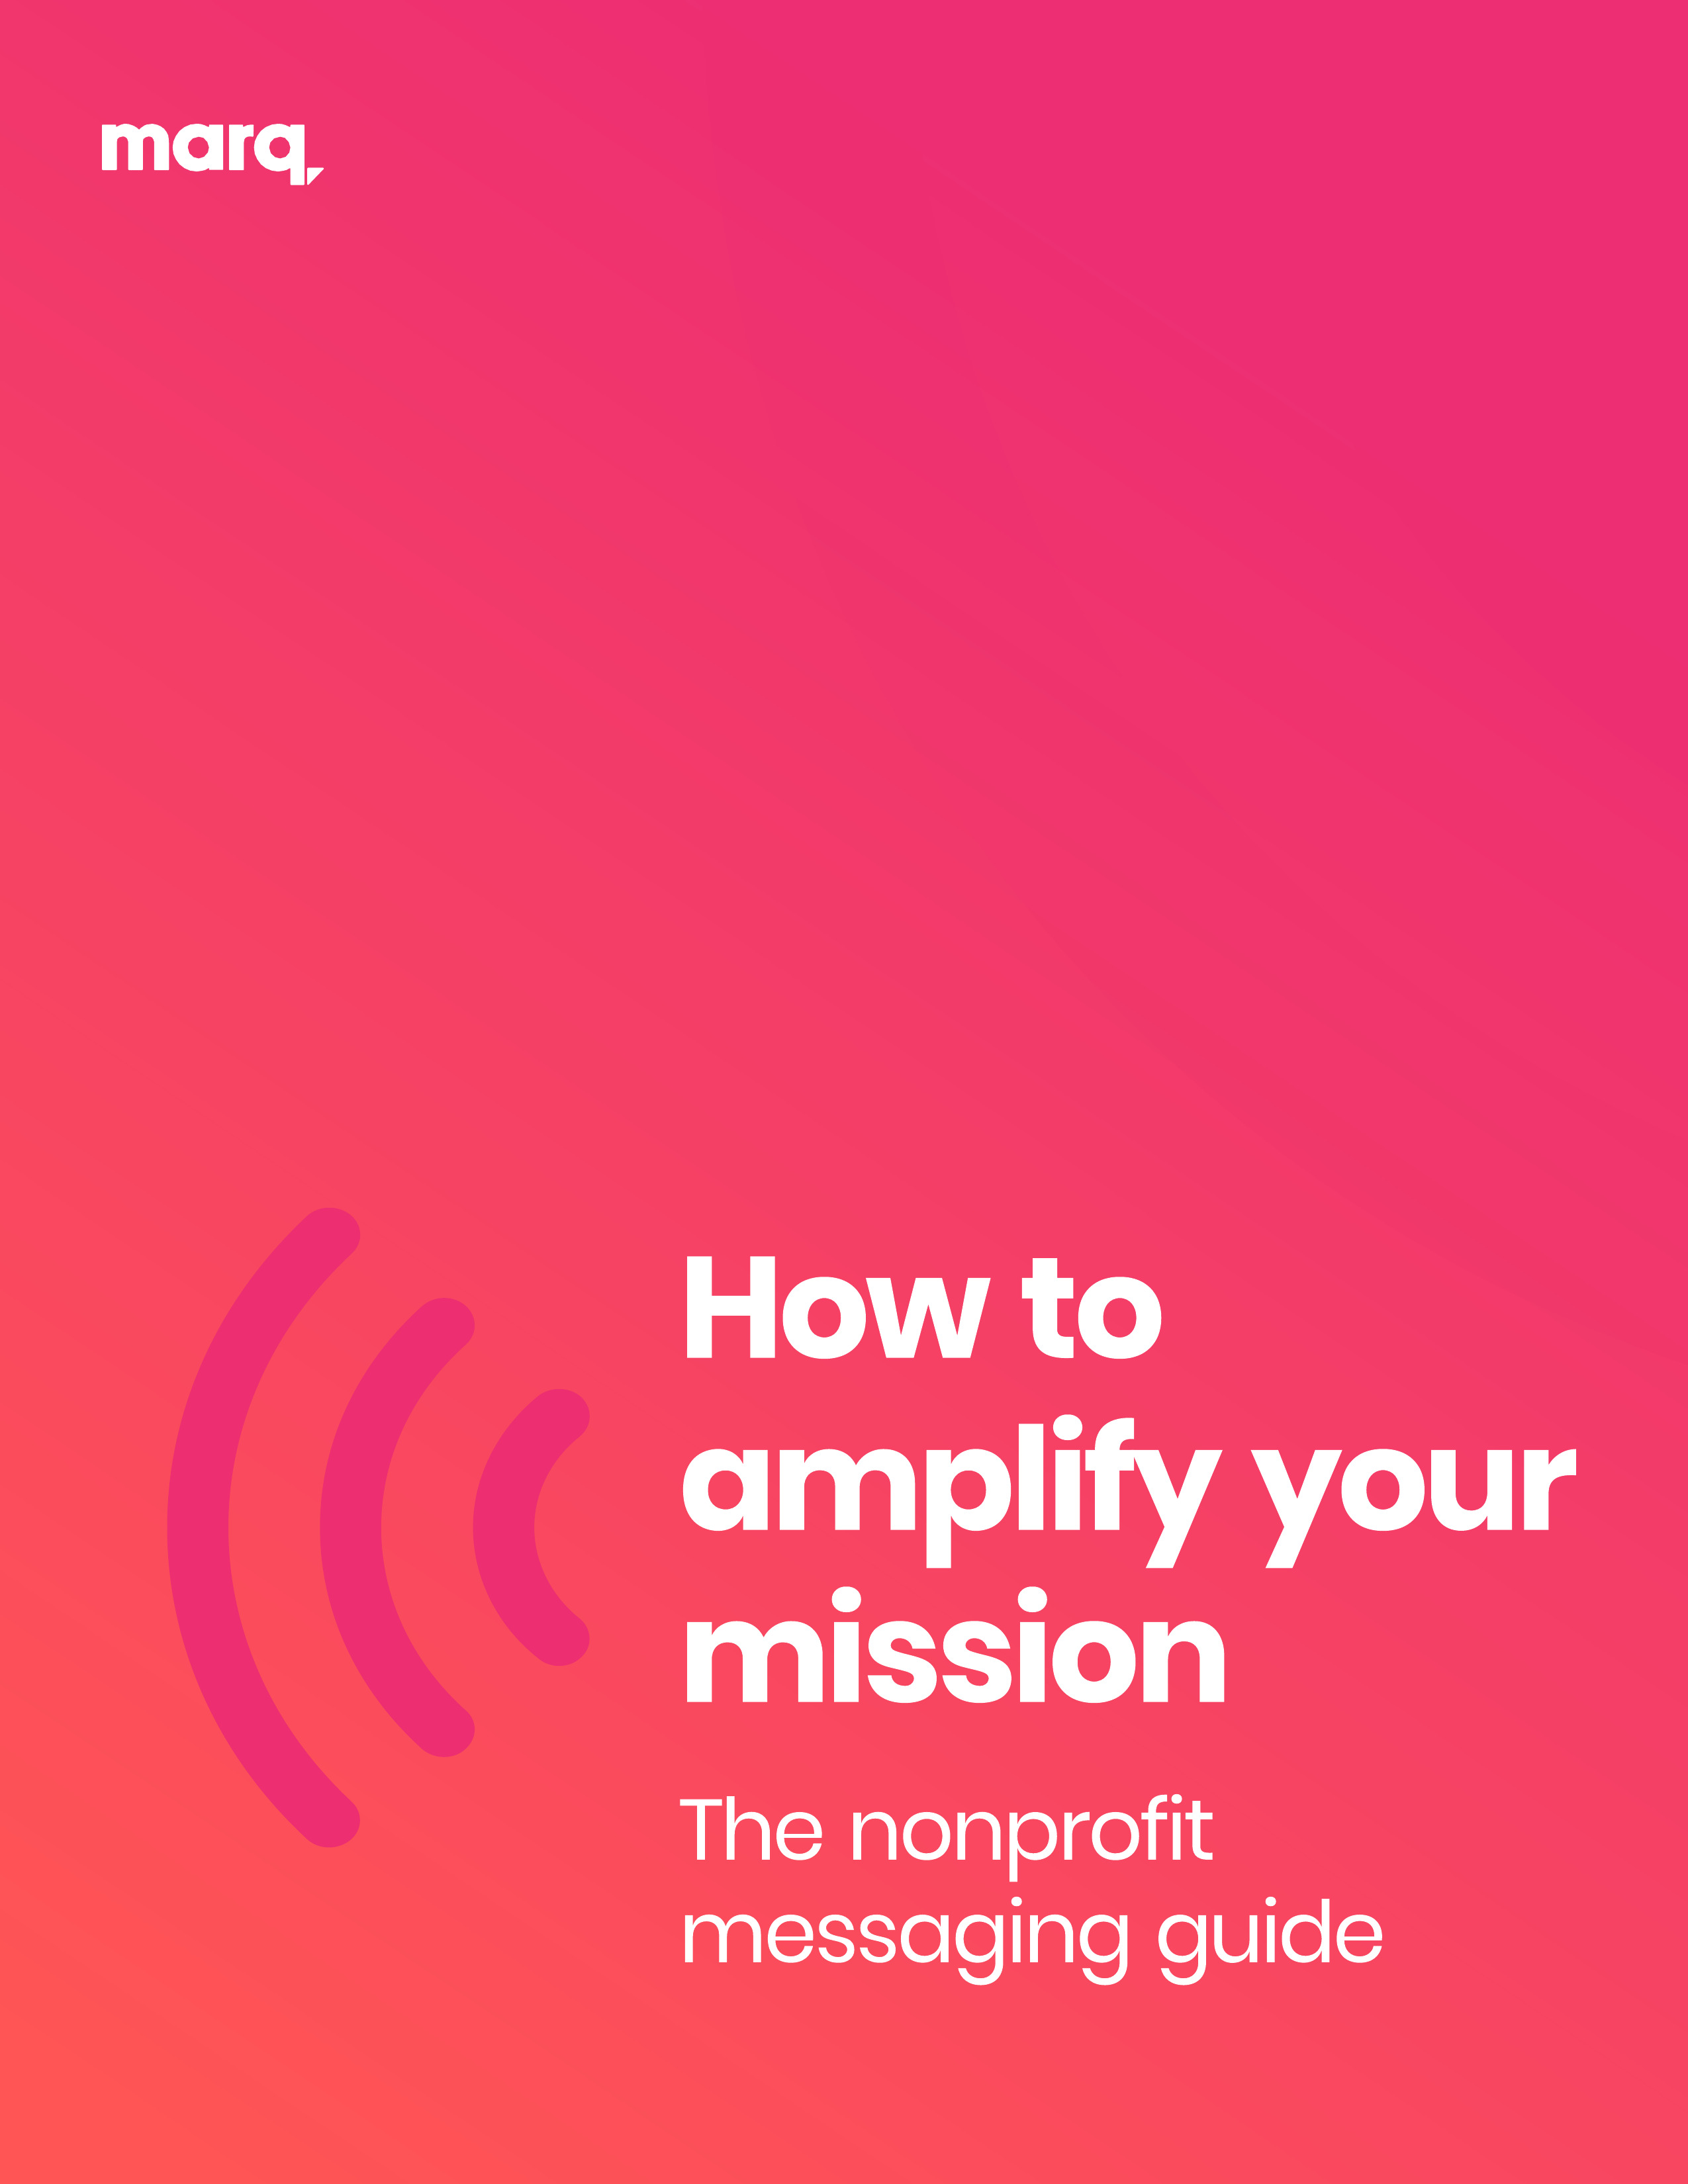 ebook-how-to-amplify-your-mission